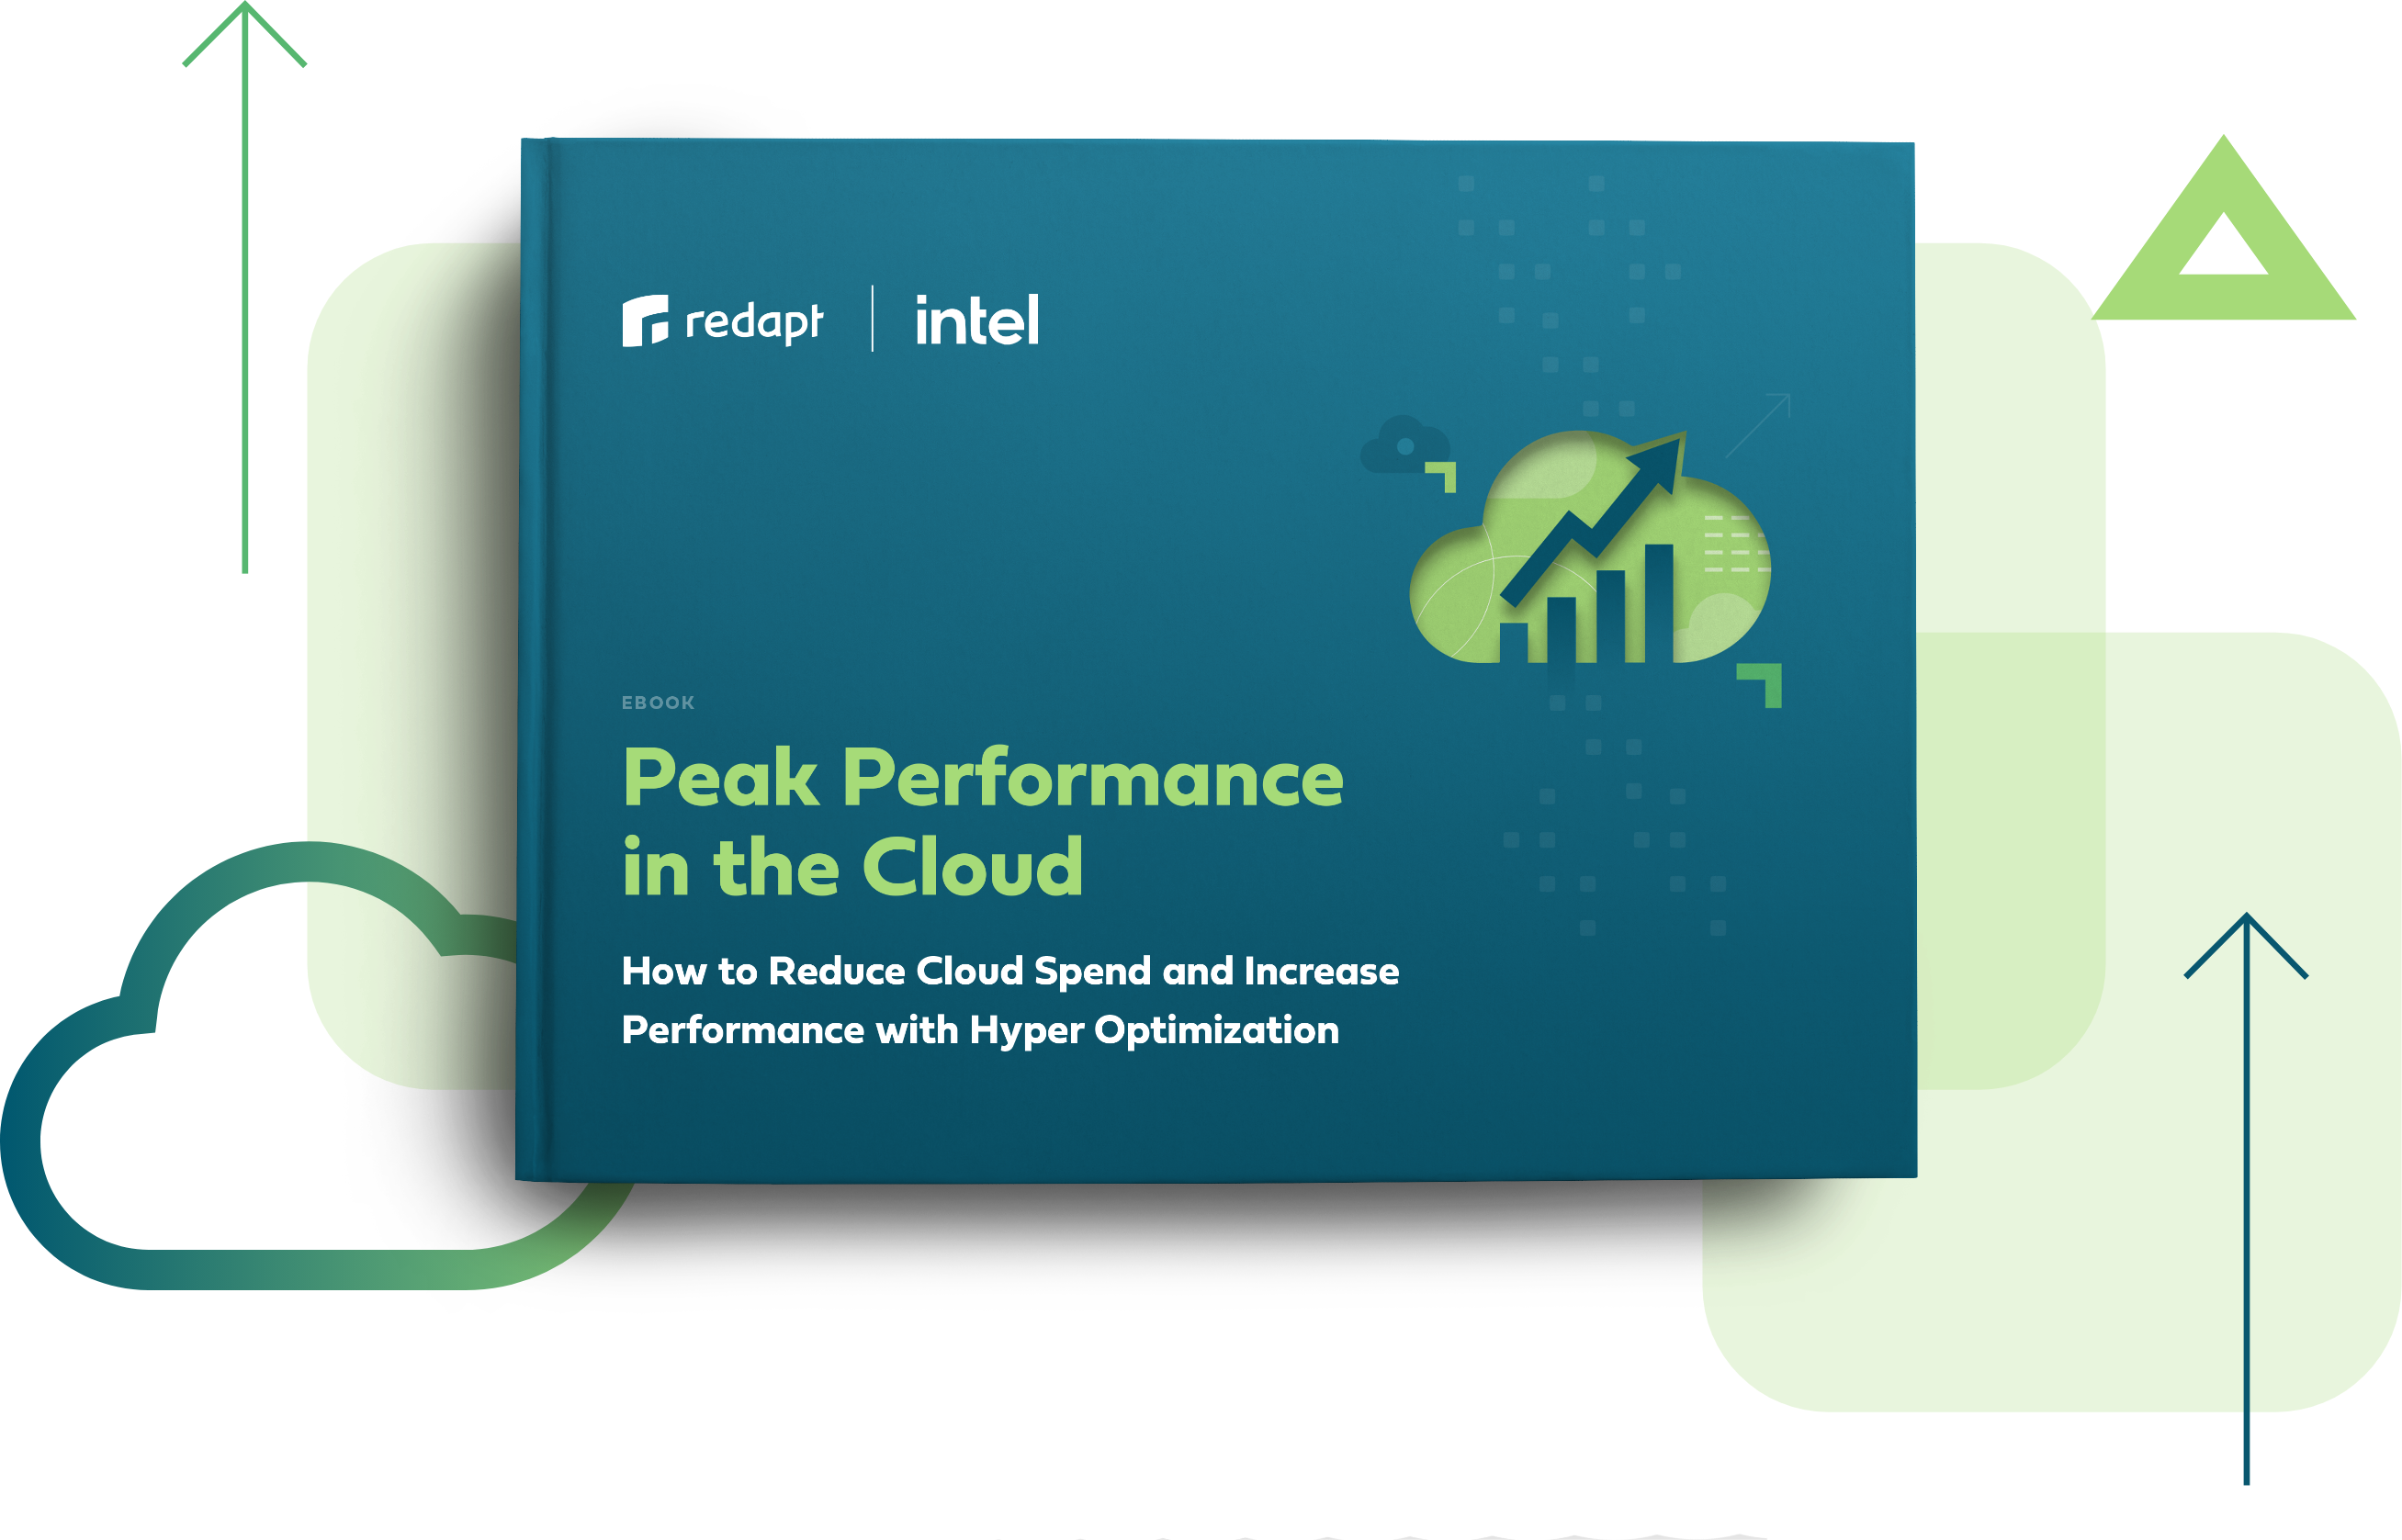 How to Reduce Cloud Spend and Increase Performance with Hyper Optimization